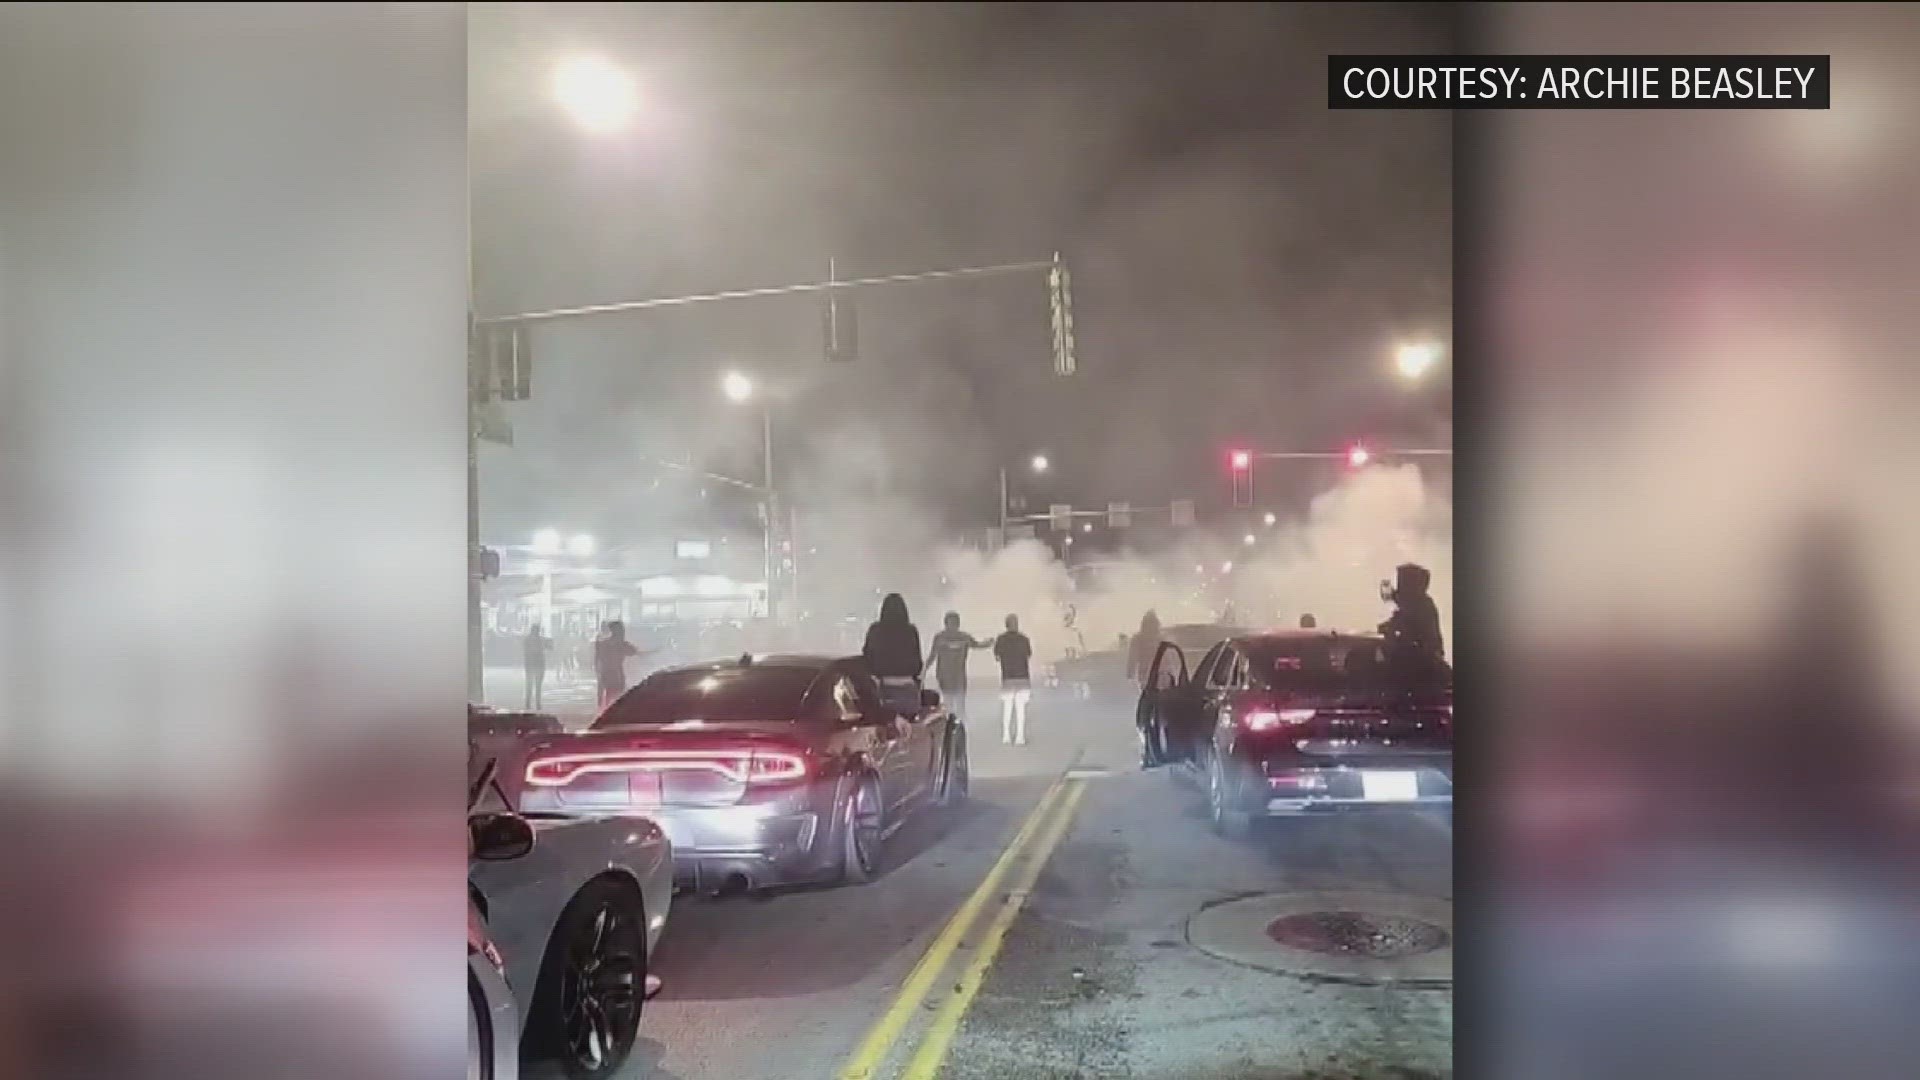 Archie Beasley and his wife were driving home from a celebration when they were met with a scene of burning rubber in a city intersection Sunday night.